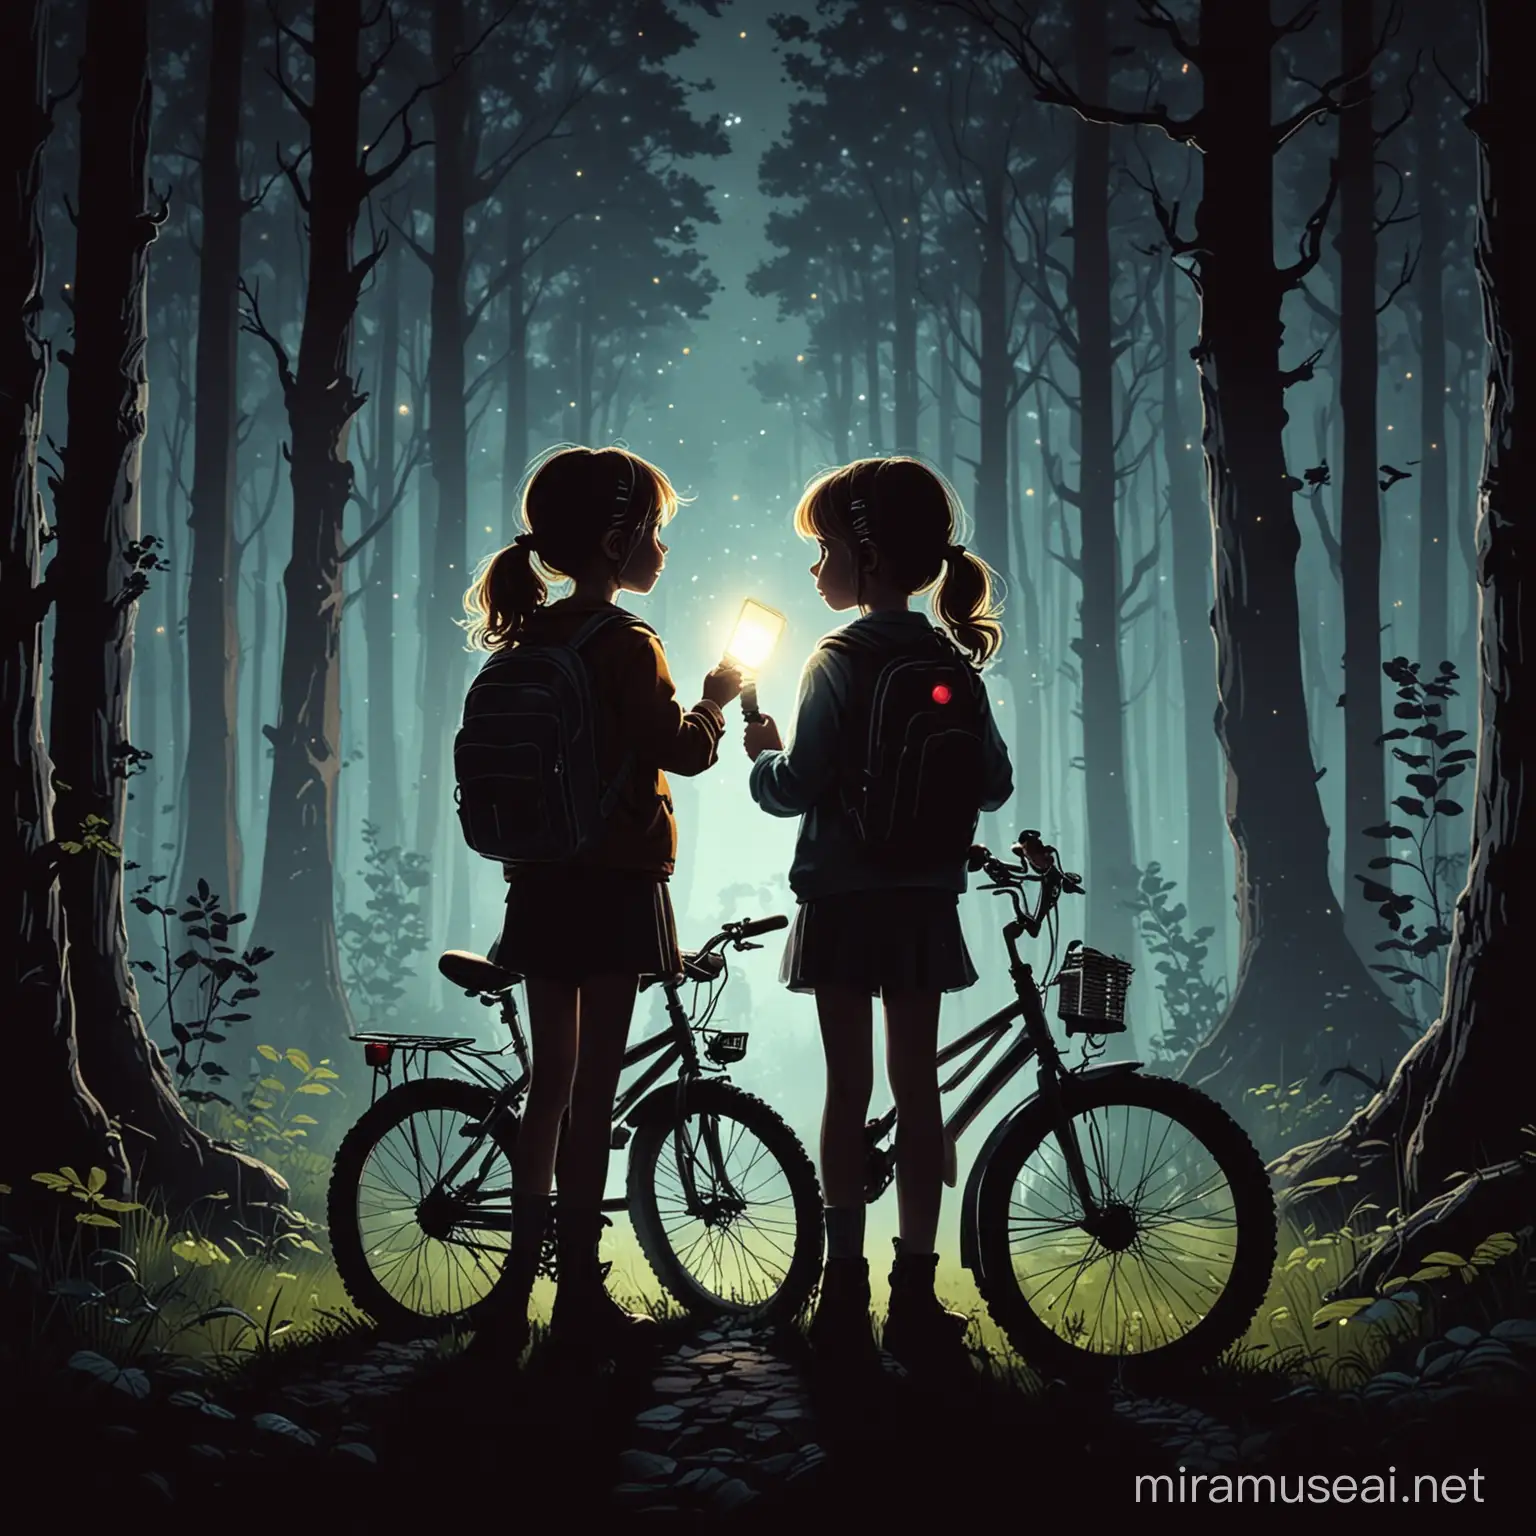 two little girls, in the forest, silhouettes, holding flashlights, with bikes, book cover, cute, cartoon style